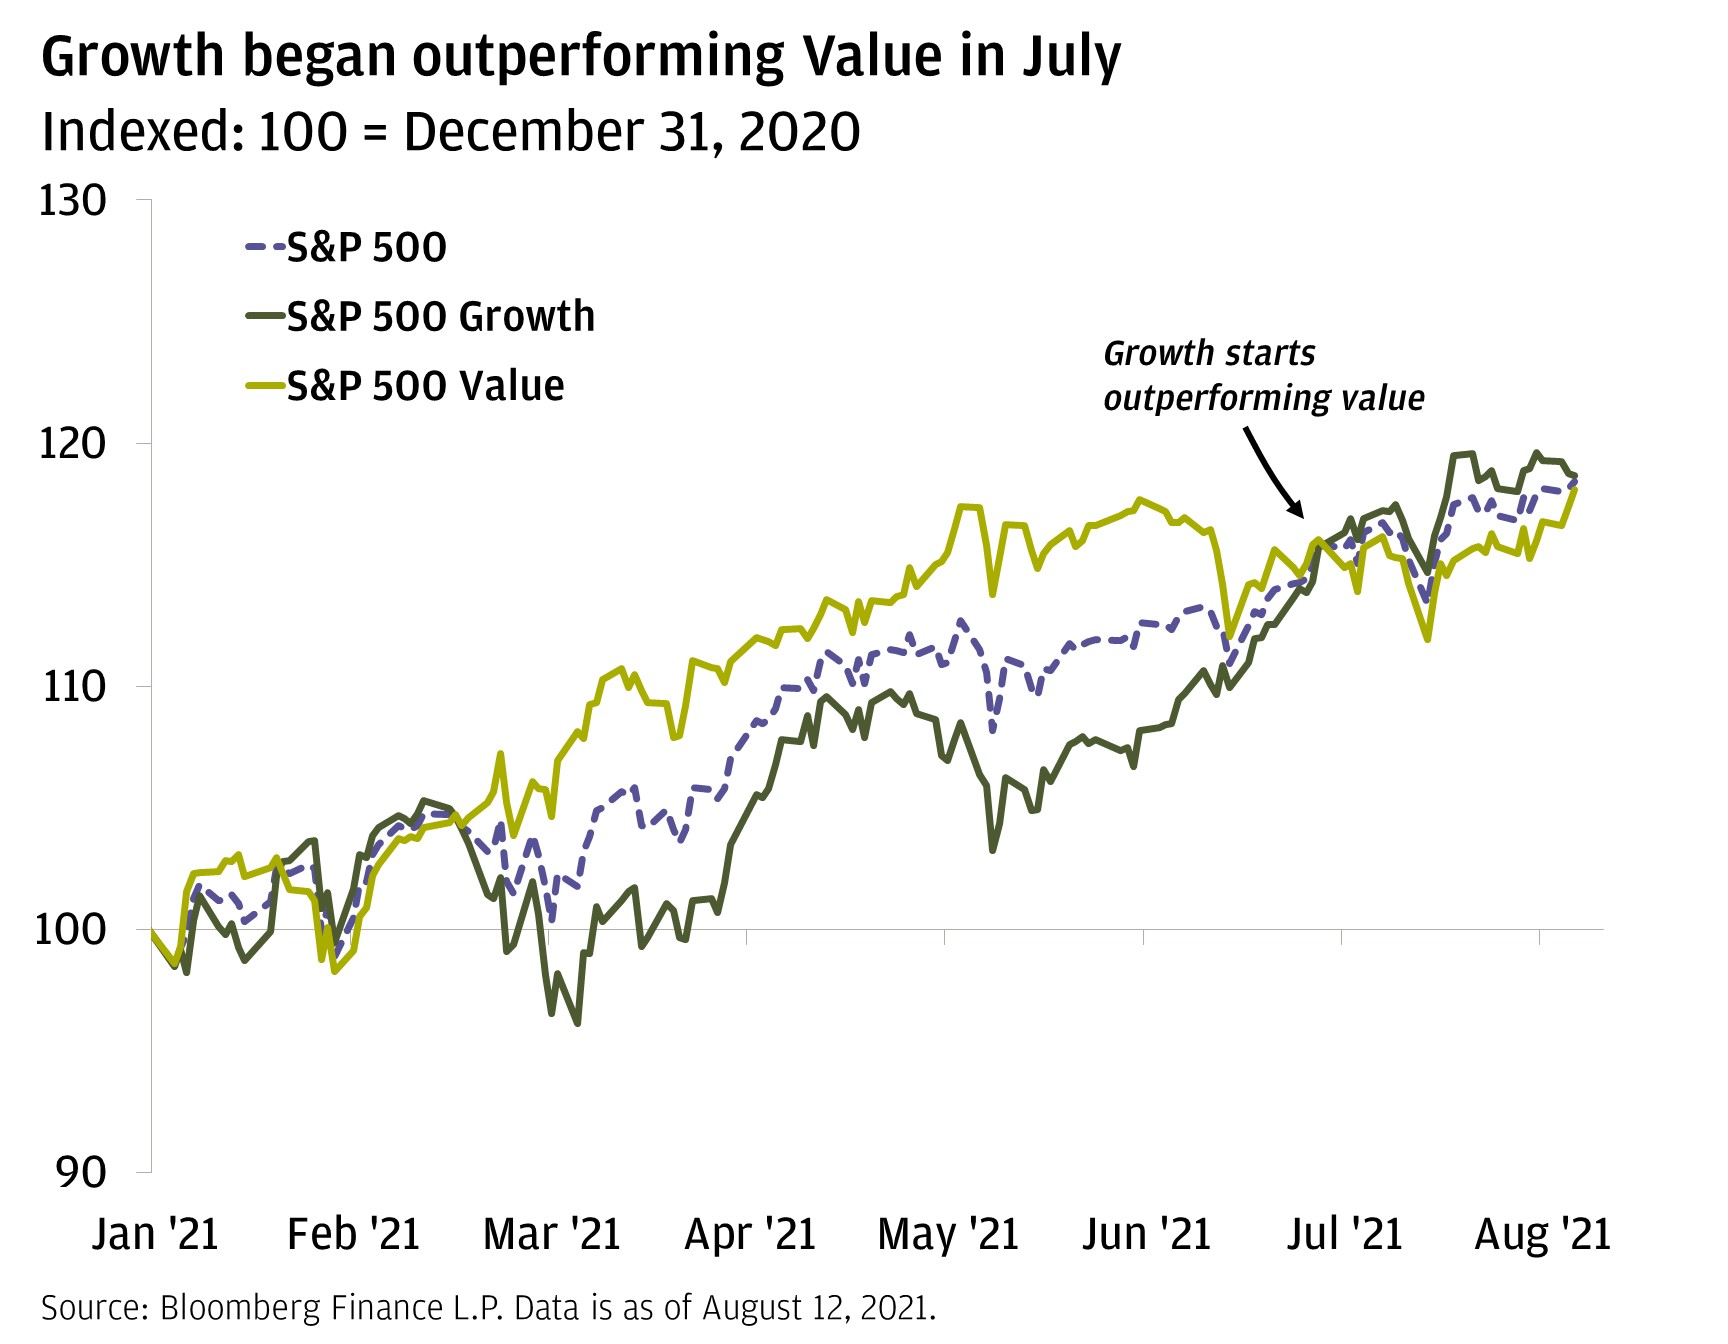 This chart shows the indexed performance of the S&P 500, S&P 500 Growth, and S&P 500 Value indices from January 2021 to the present. The data is indexed to 100 at December 31, 2020.   January and February saw all three indices fluctuate slightly, but ultimately end the month roughly where they started (around 100). March saw the Value index move up to 110, outperforming the S&P 500’s move to 105 and the Growth complex’s move to 102. April displayed a similar but more modest trend, with Value climbing to 114, the S&P 500 to 111, and Growth playing some catch up to 108. In May, Value moved to 117, the S&P 500 moved up slightly to 112, and Growth moved slightly down to 107. June saw Growth and Value begin to converge, with Value ending the month at 115, Growth at 114, and the broad S&P 500 at 114.   In July, Growth finished at 118, overtaking Value which finished at 115. The S&P 500 finished at 117. Month-to-date in August, we’ve once again seen a convergence: Growth is just a touch above Value (both are slightly higher than 118), and the broad S&P 500 is also at 118.